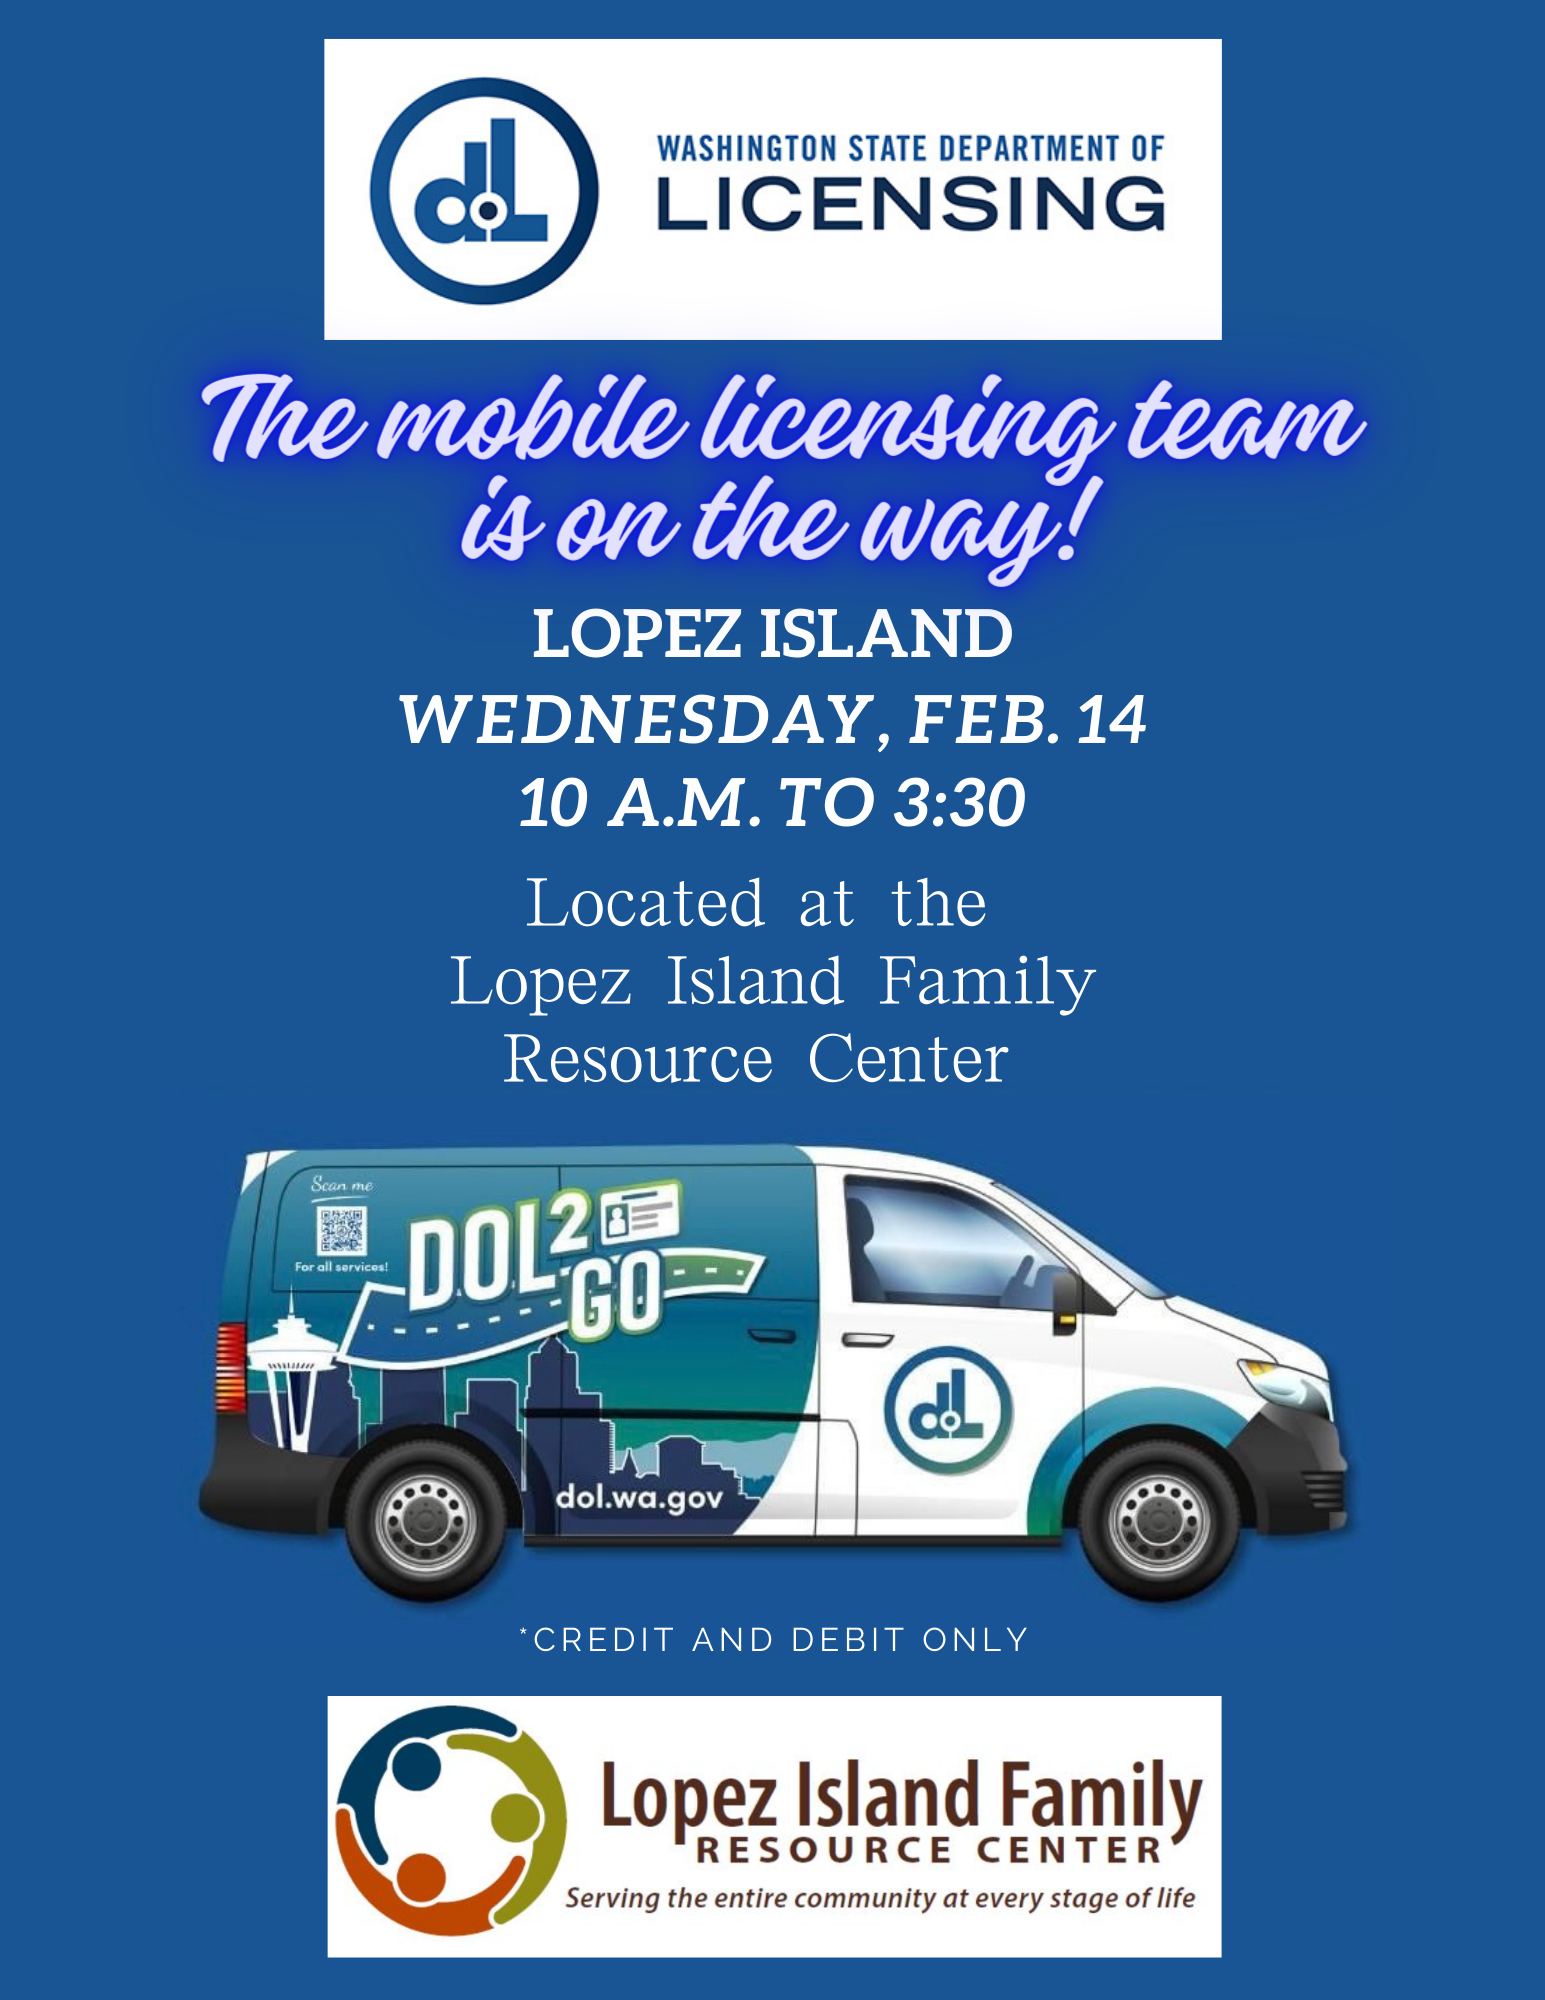 The Department of Licensing is coming to Lopez